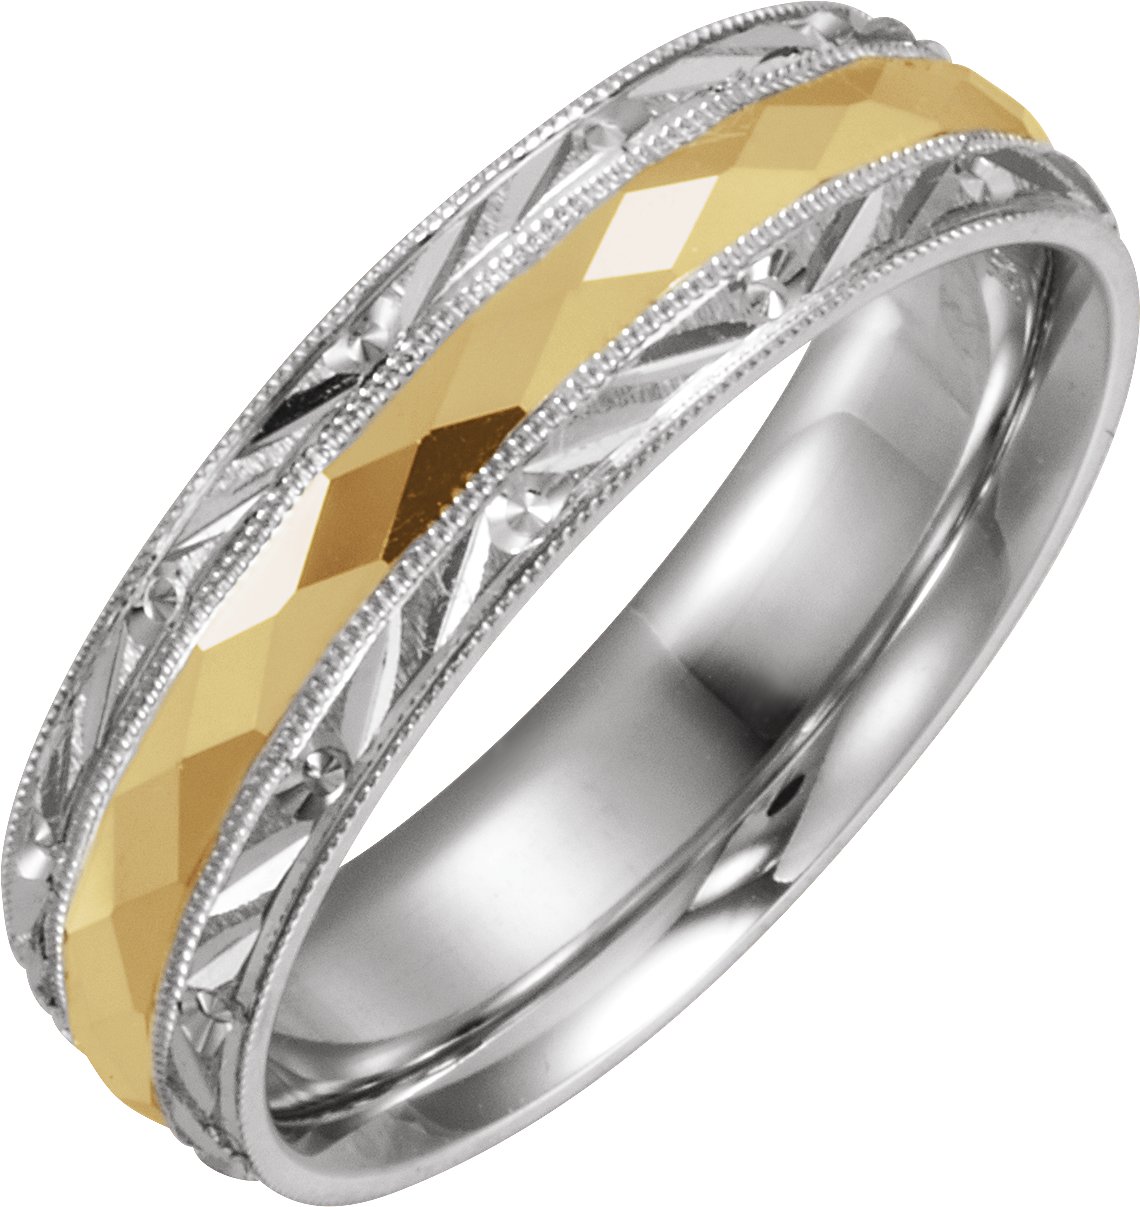 14K White/Yellow 6 mm Design-Engraved Band with Milgrain Size 9.5